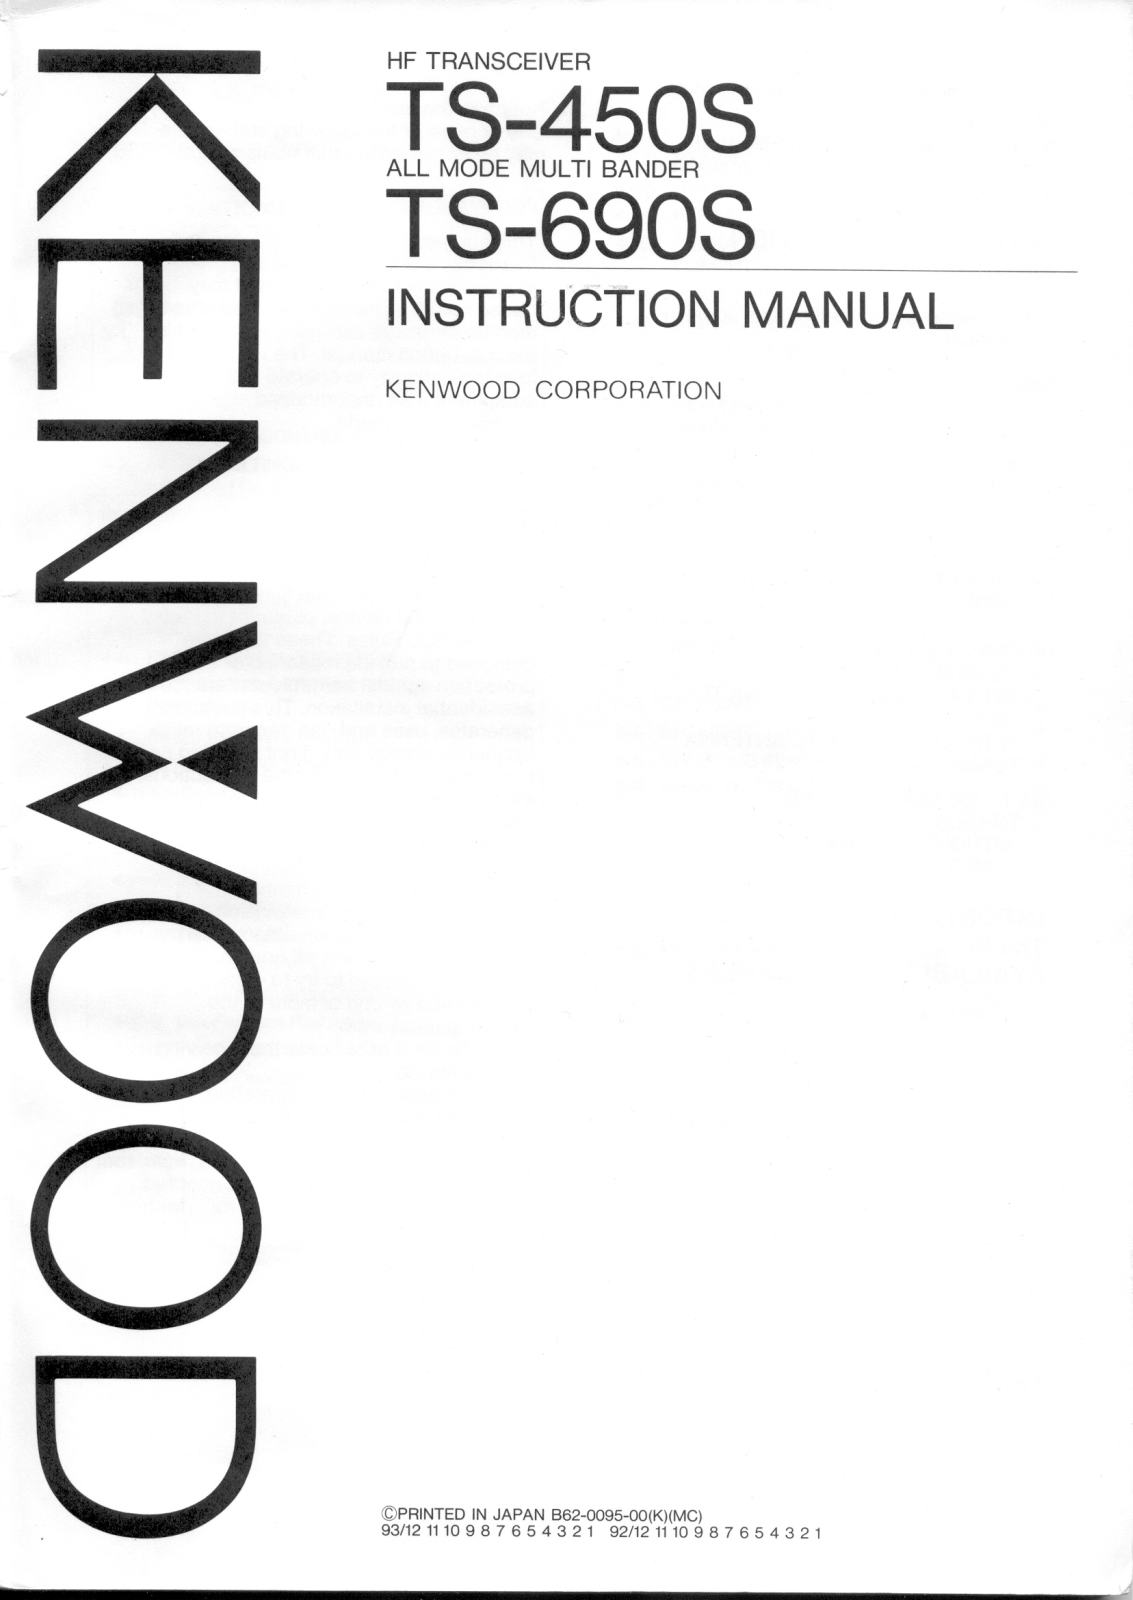 Kenwood TS-690S, TS-450S Owner's Manual